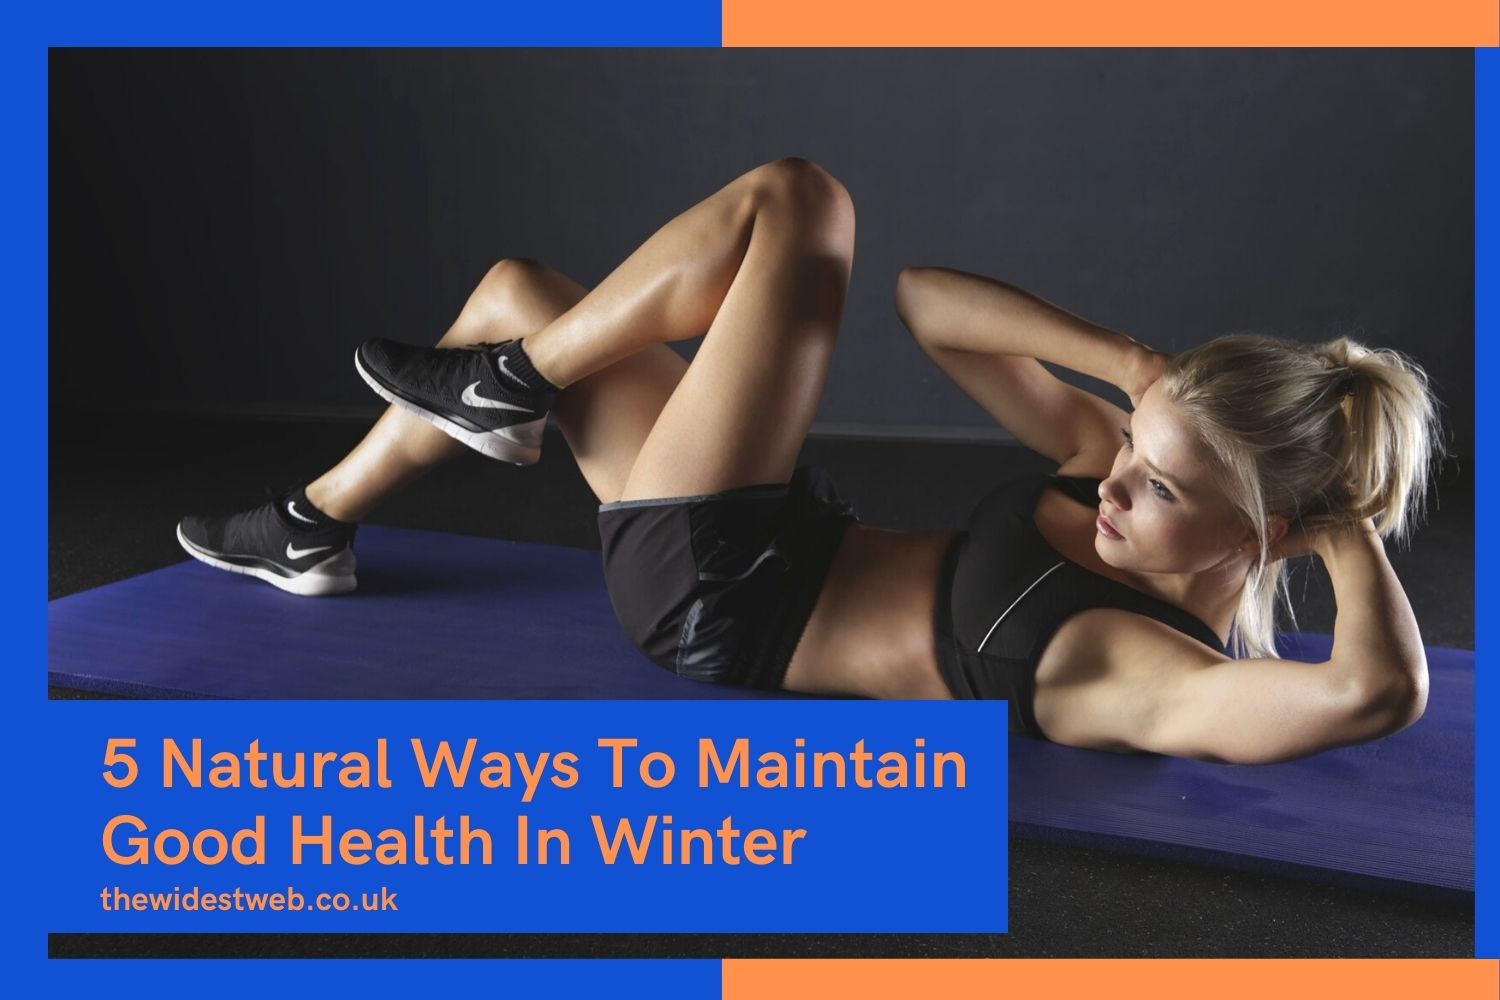 5 Natural Ways To Maintain Good Health In Winter